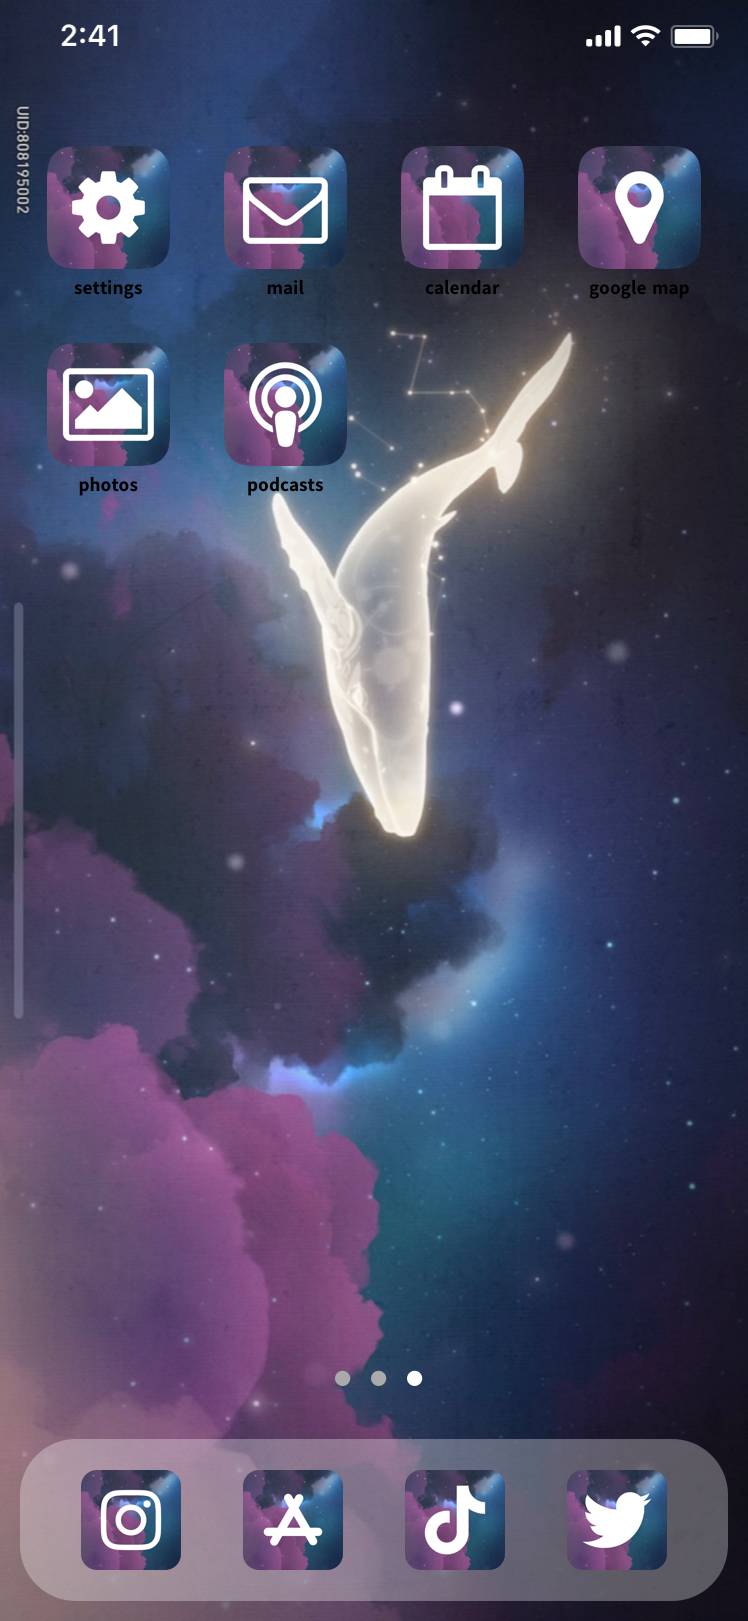 cloudy space with whaleeHome Screen ideas[ps9NVqtcfruHOJVyHn3t]